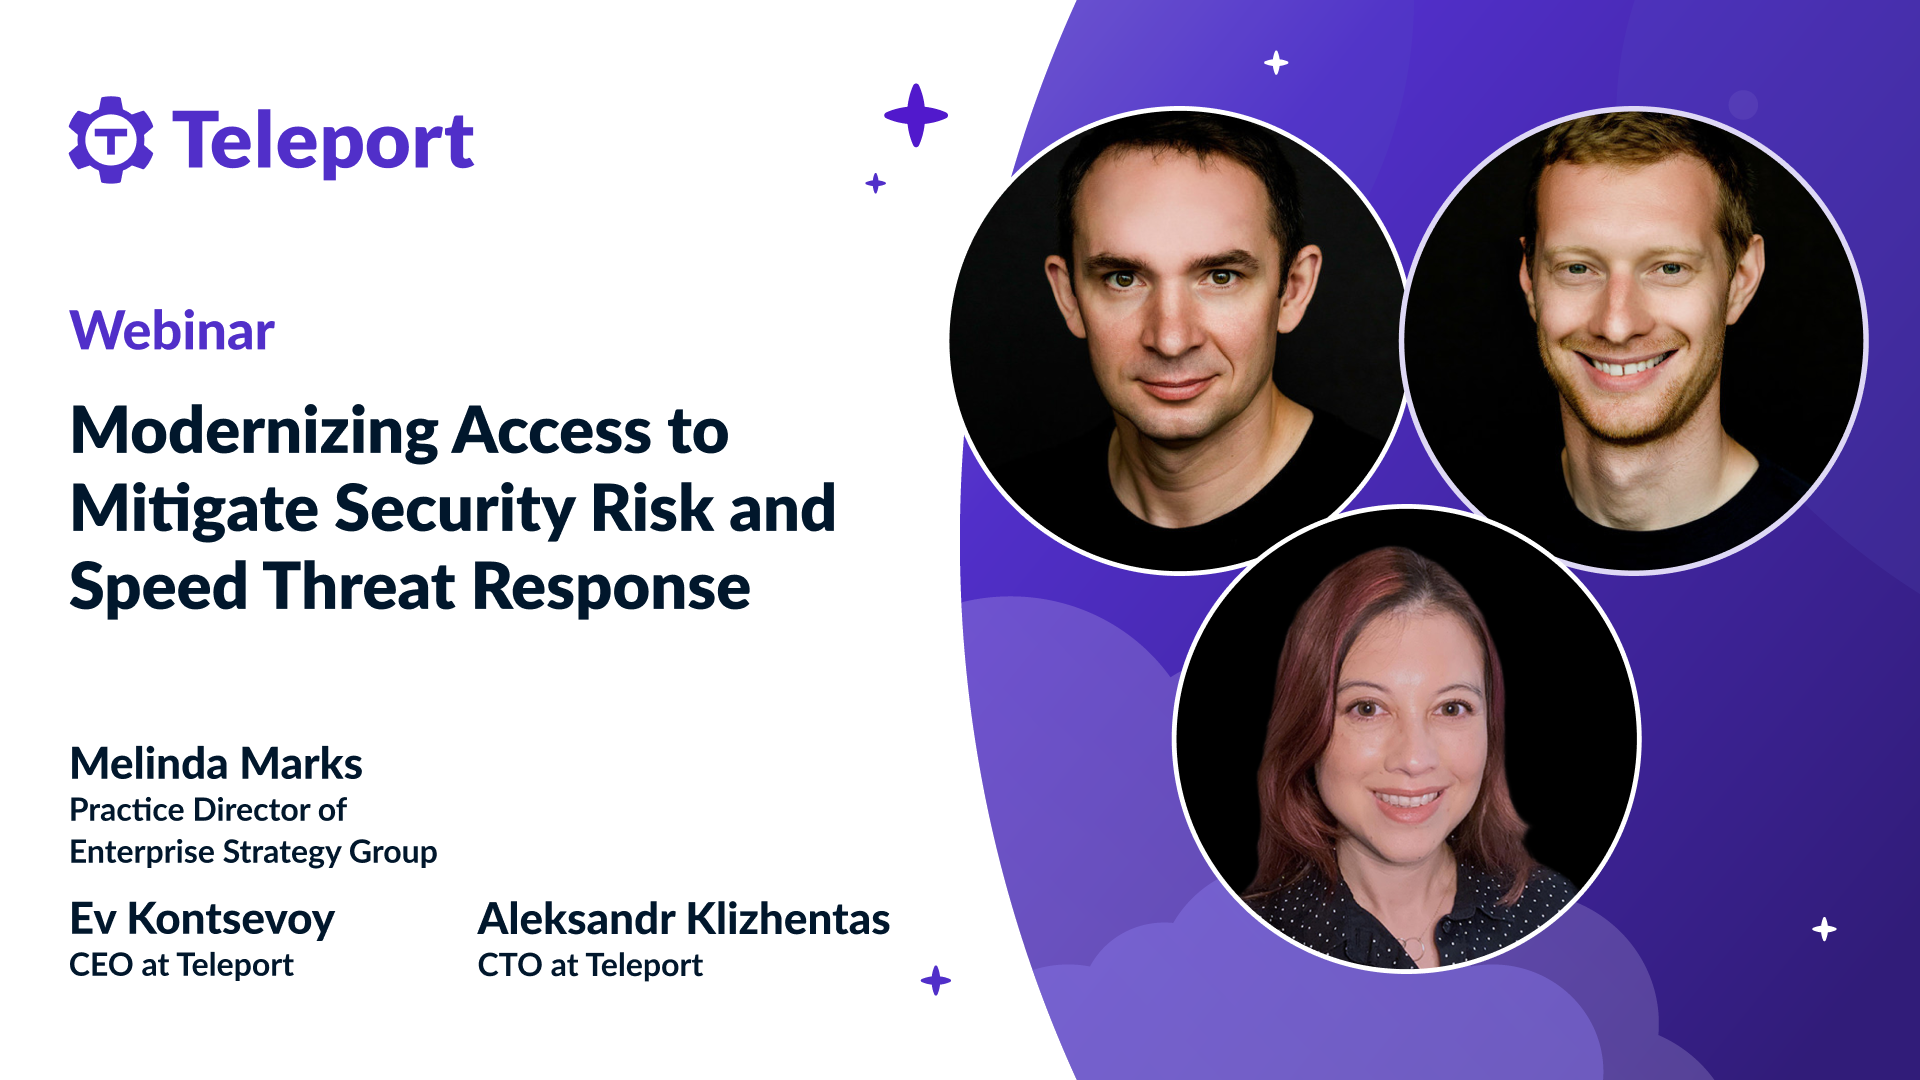 Modernizing Access to Mitigate Security Risk and Speed Threat Response